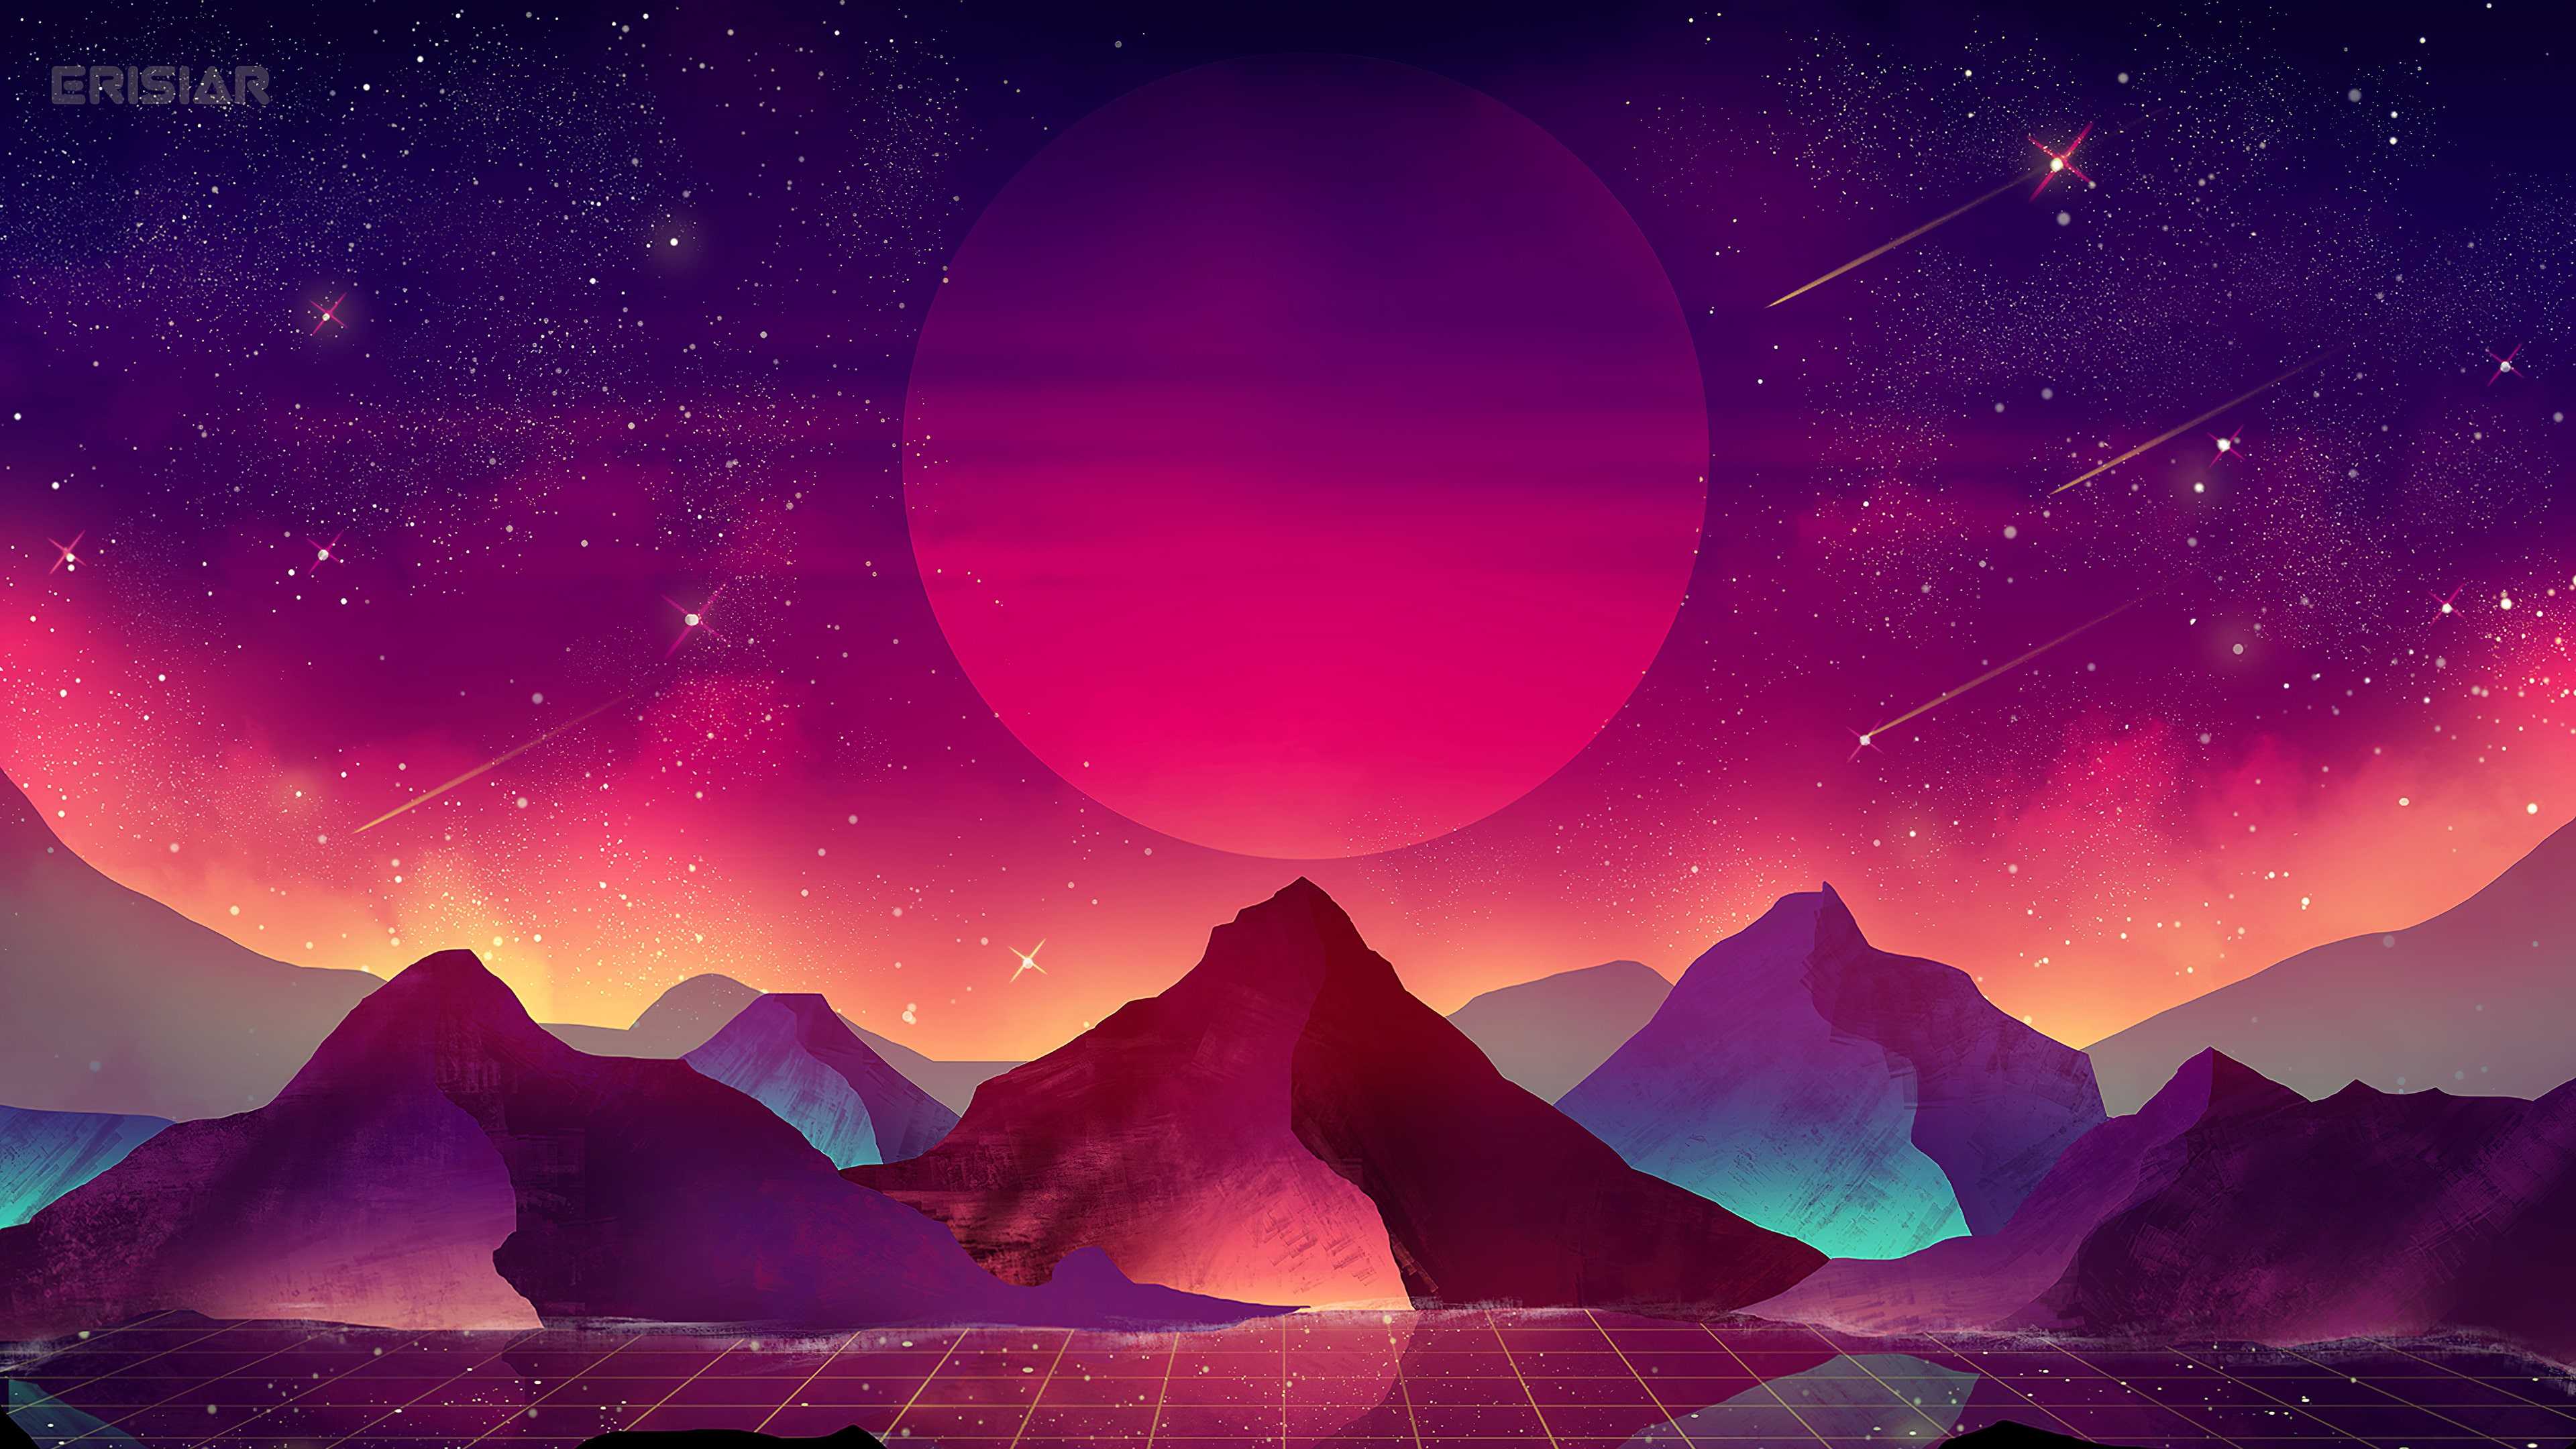 A computer generated image of mountains and stars - Vaporwave